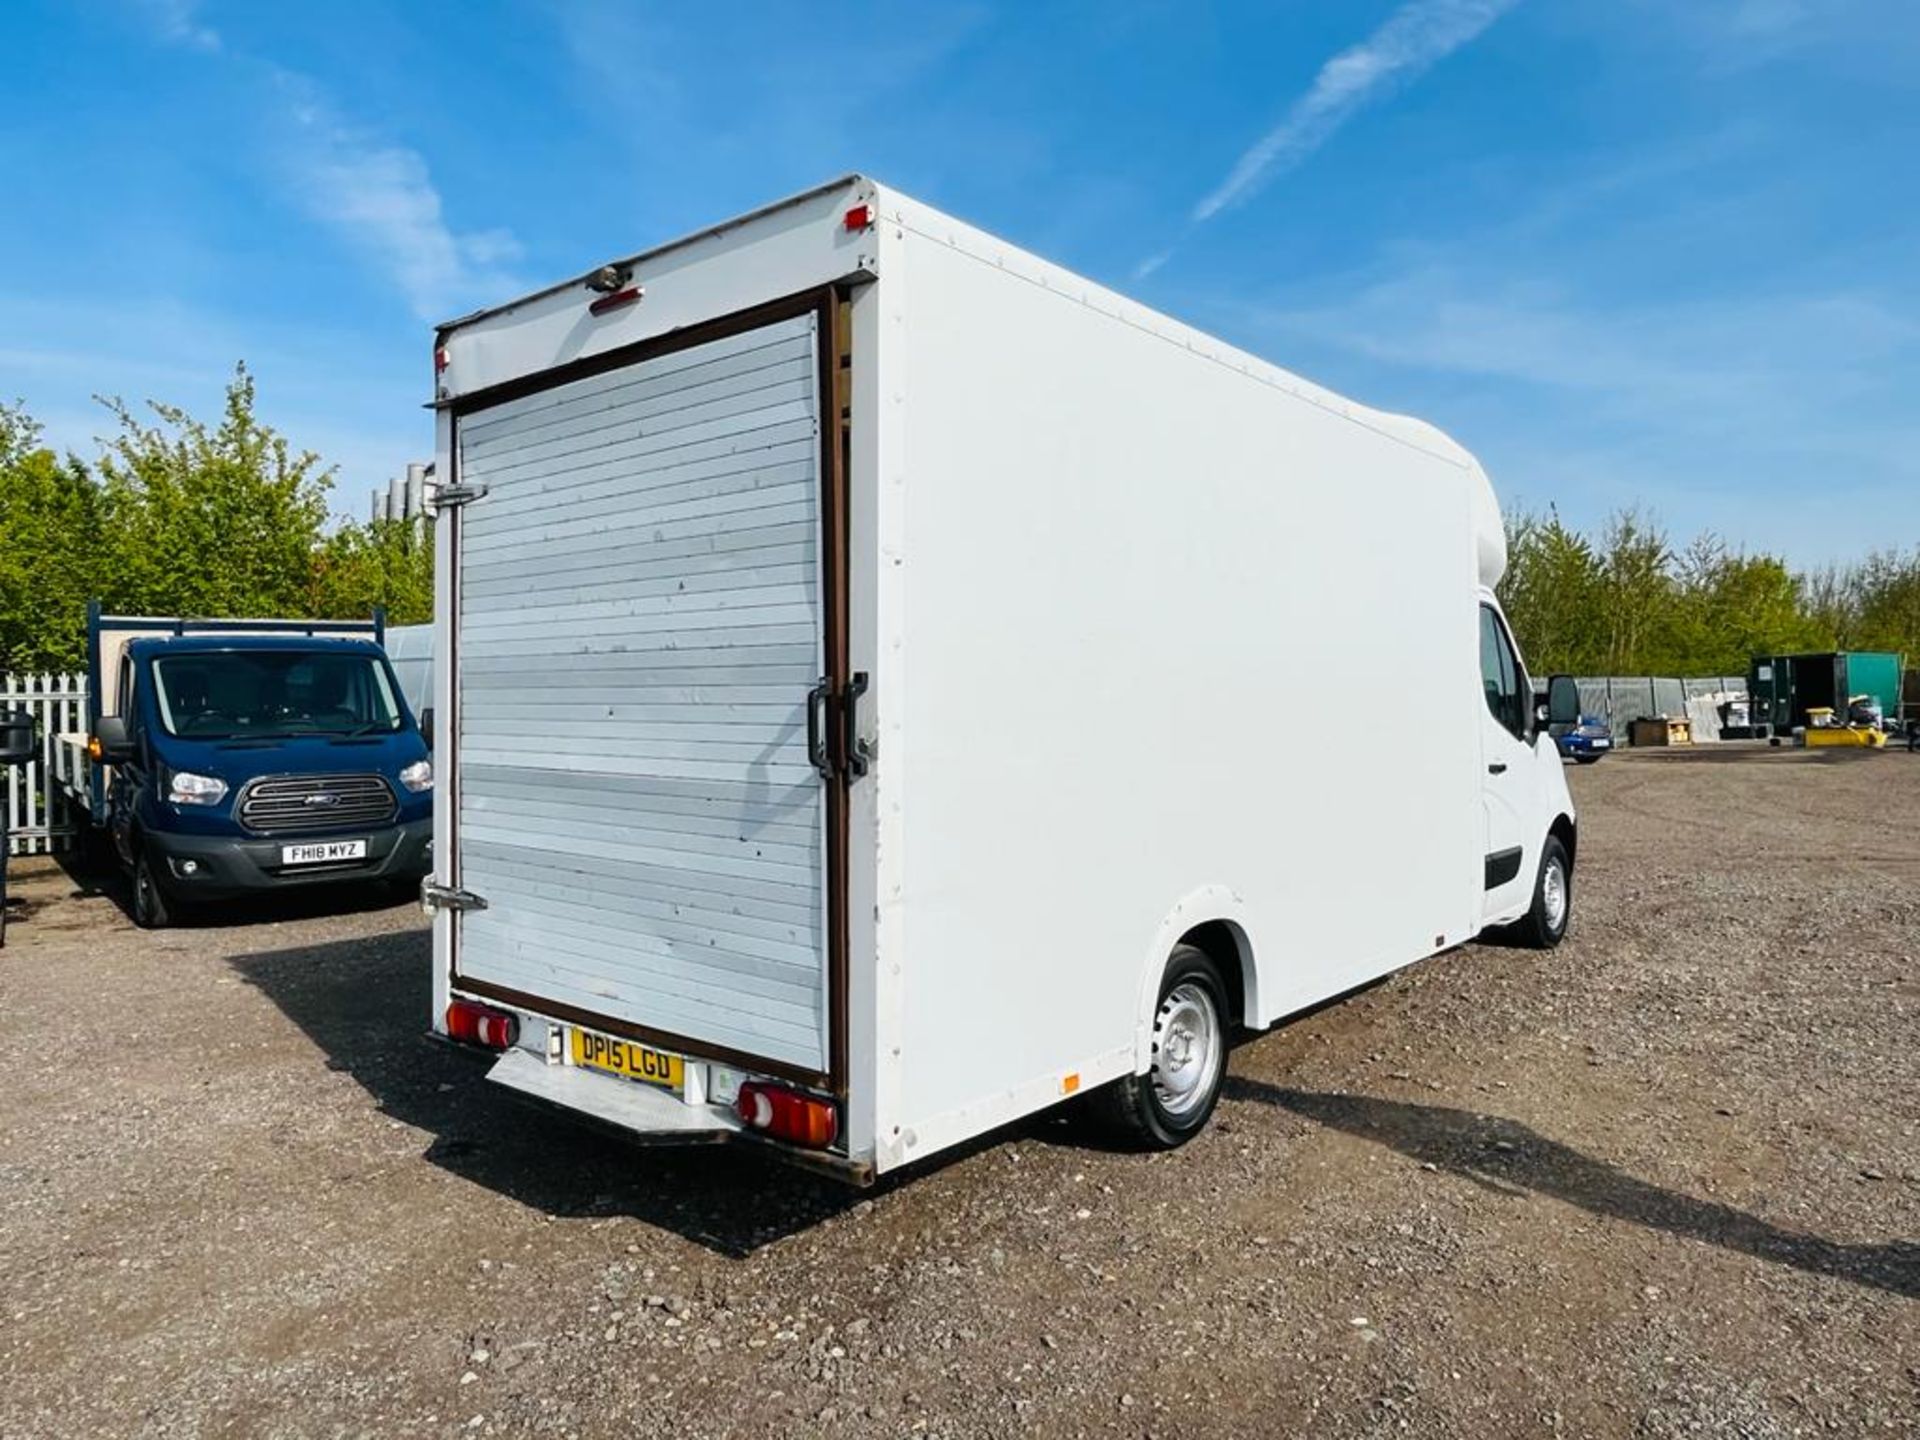 ** ON SALE ** Vauxhall Movano Low Loader 3500 CDTI 125 2.3 L3 H1 2015 "15 Reg" - 3.5 Tonne - Image 8 of 22